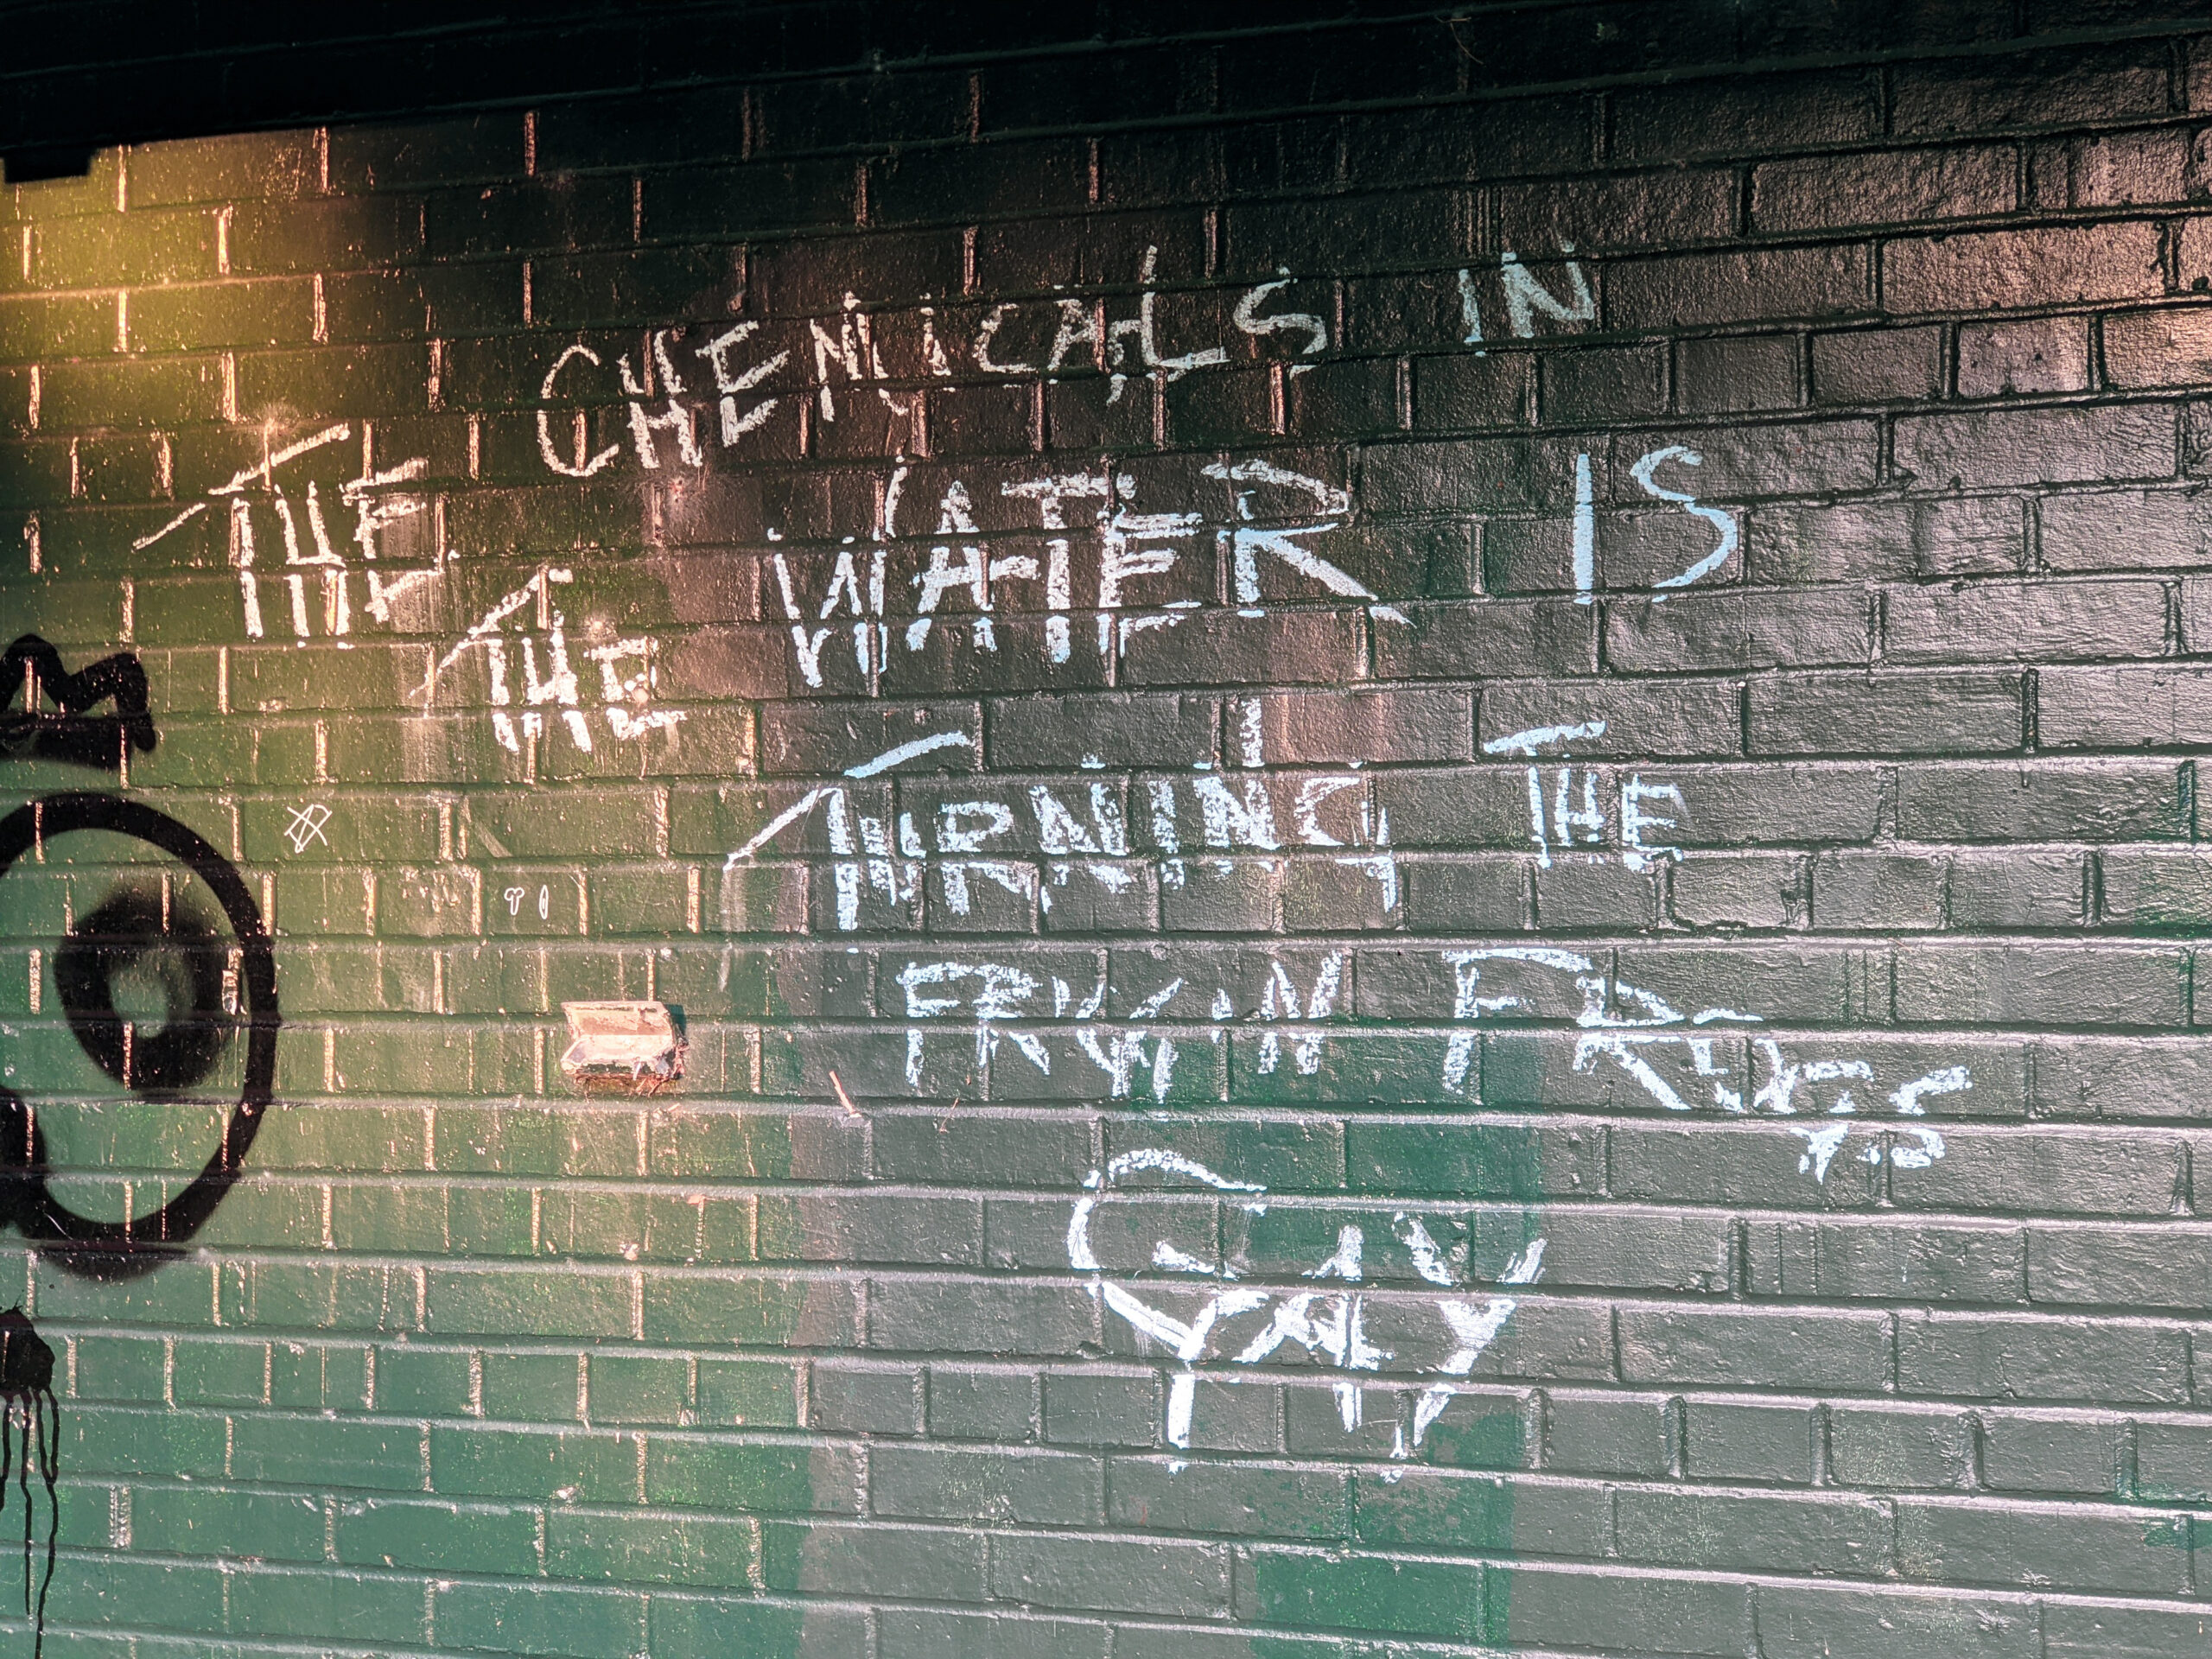 An outdoor brick wall has been painted with the words, "The chemicals in the water is turning the friggin' frogs gay".